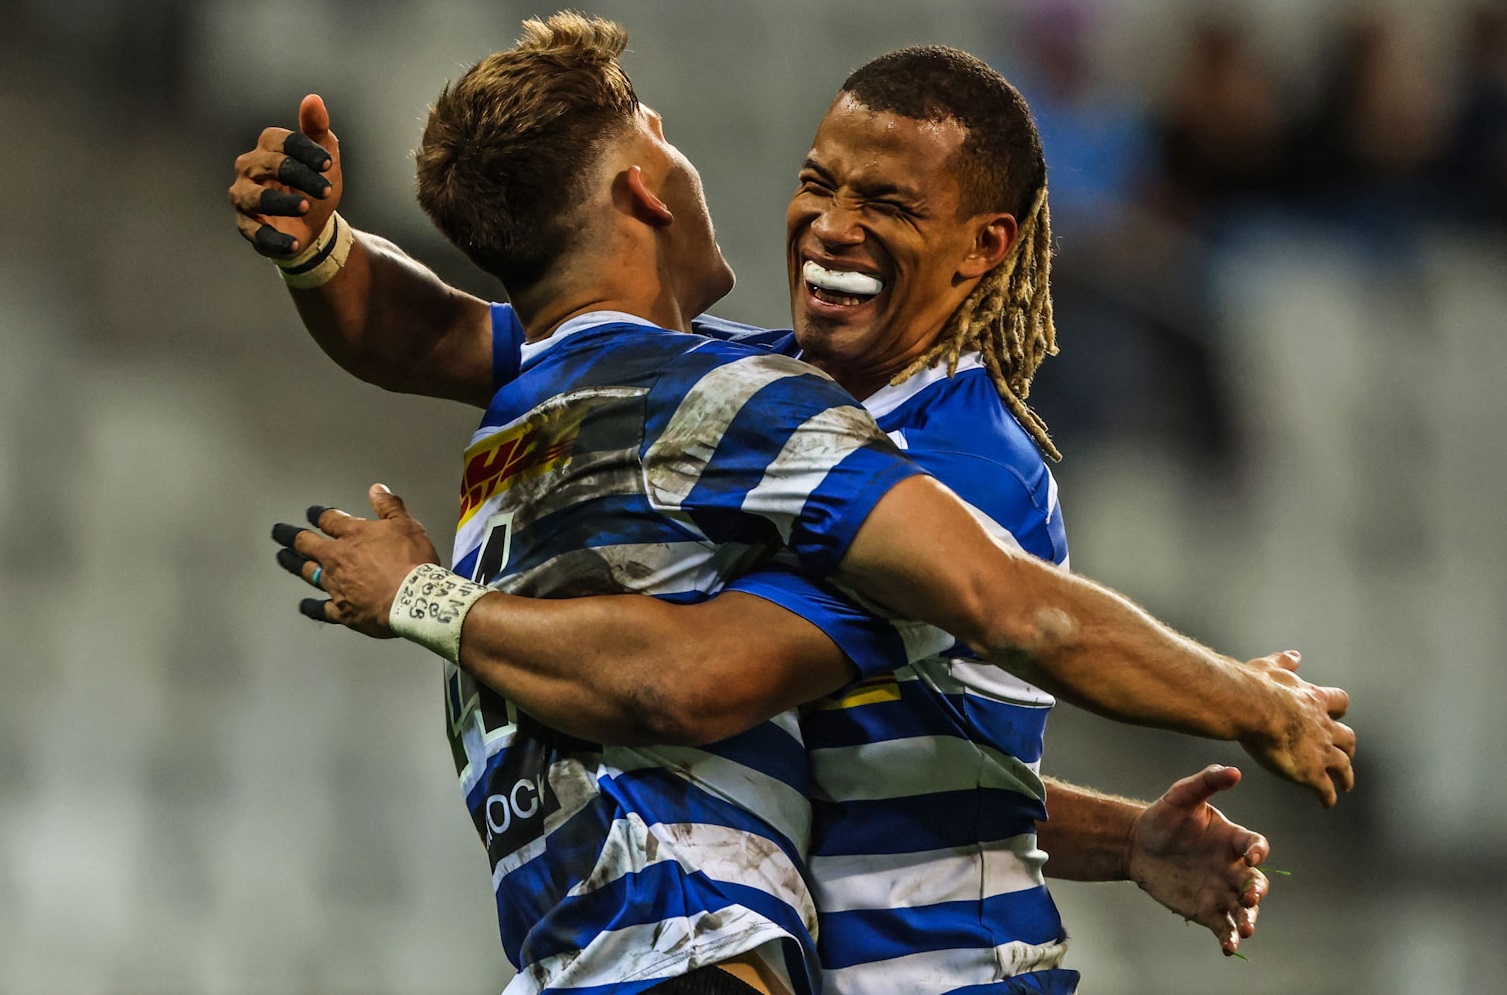 State of the Currie Cup: Weekend for movers and shakers